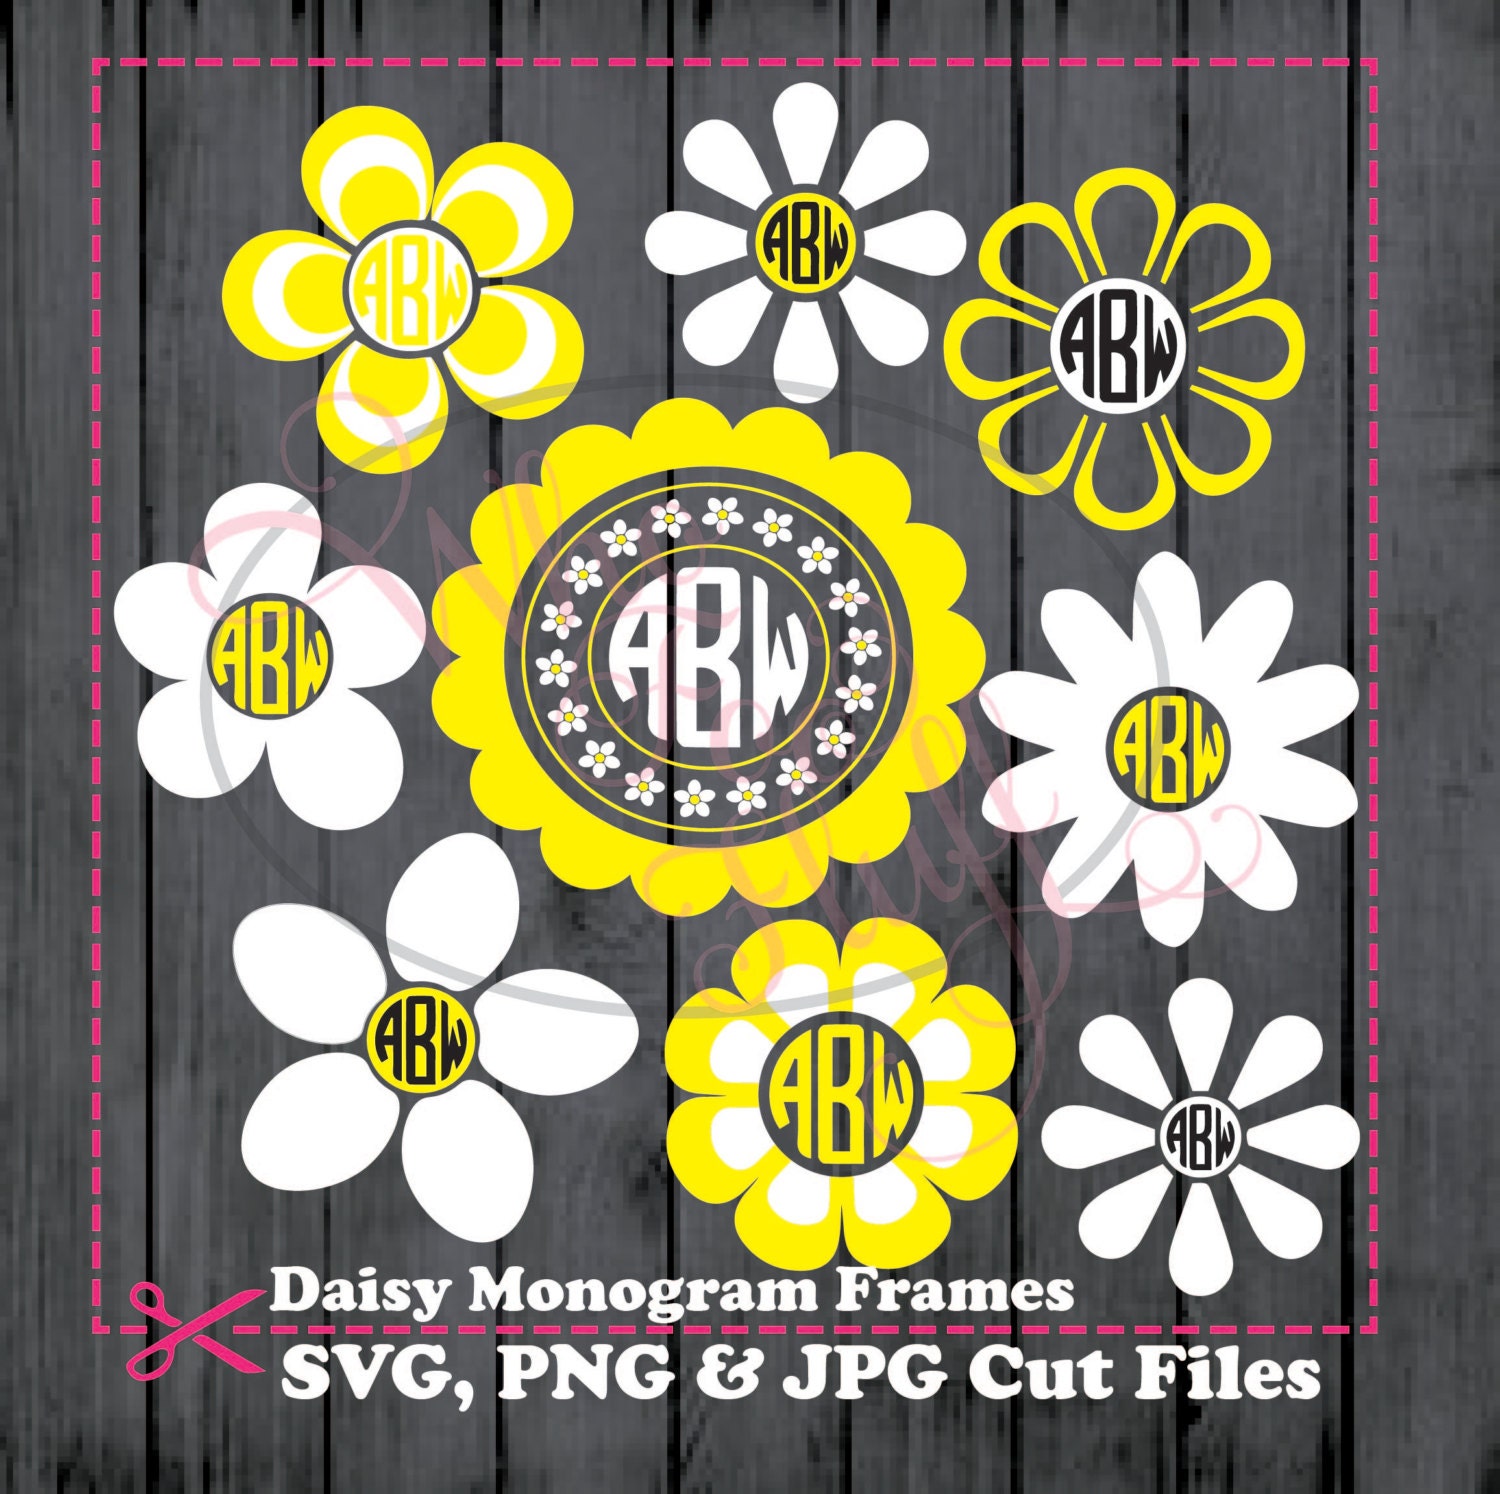 Download Daisies 9 monogram daisy frames svg png jpg cutting file